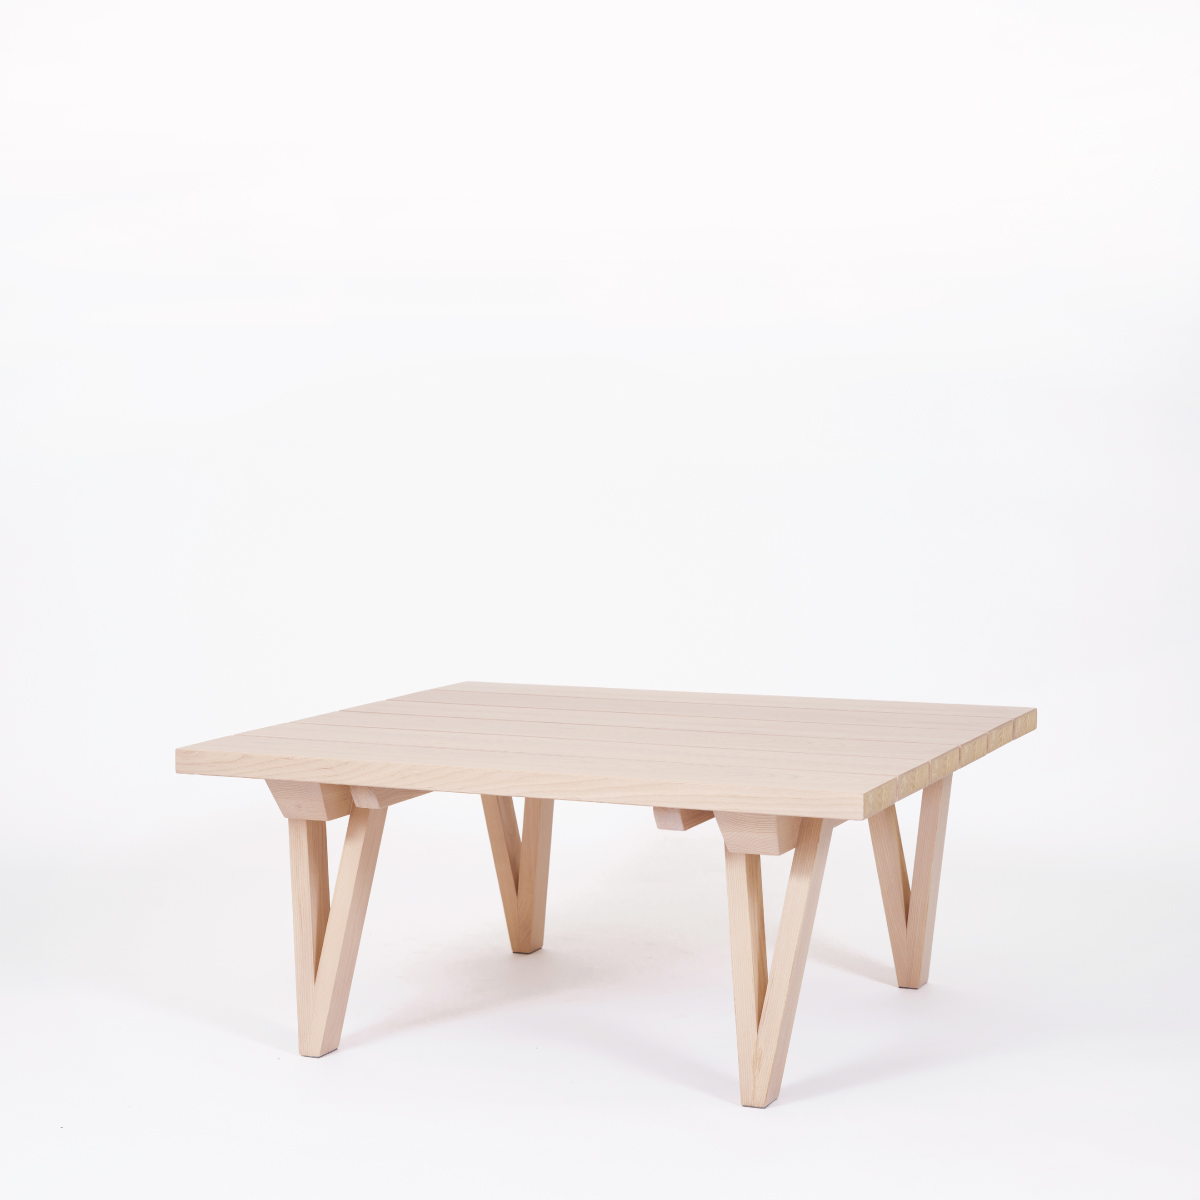 CT401-2 Loom Center Table-01 (Plank)